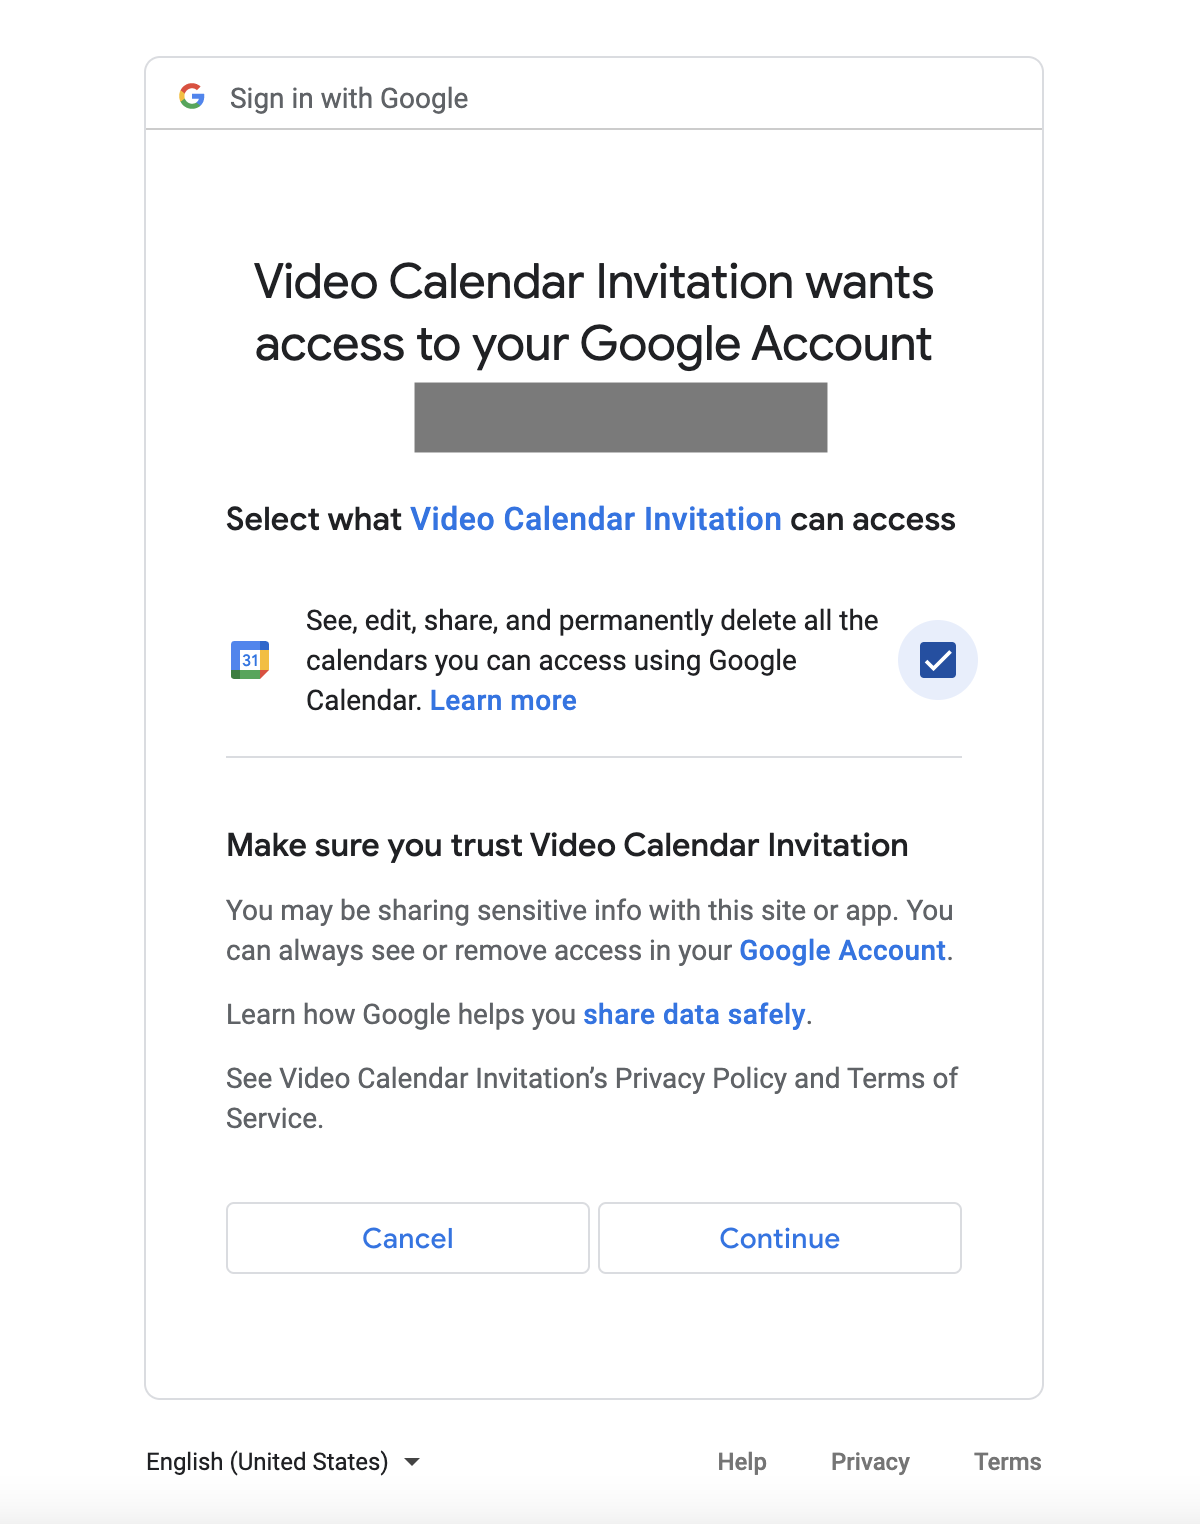 Google consent form, prompting the user to allow access to their Google account and calendar data